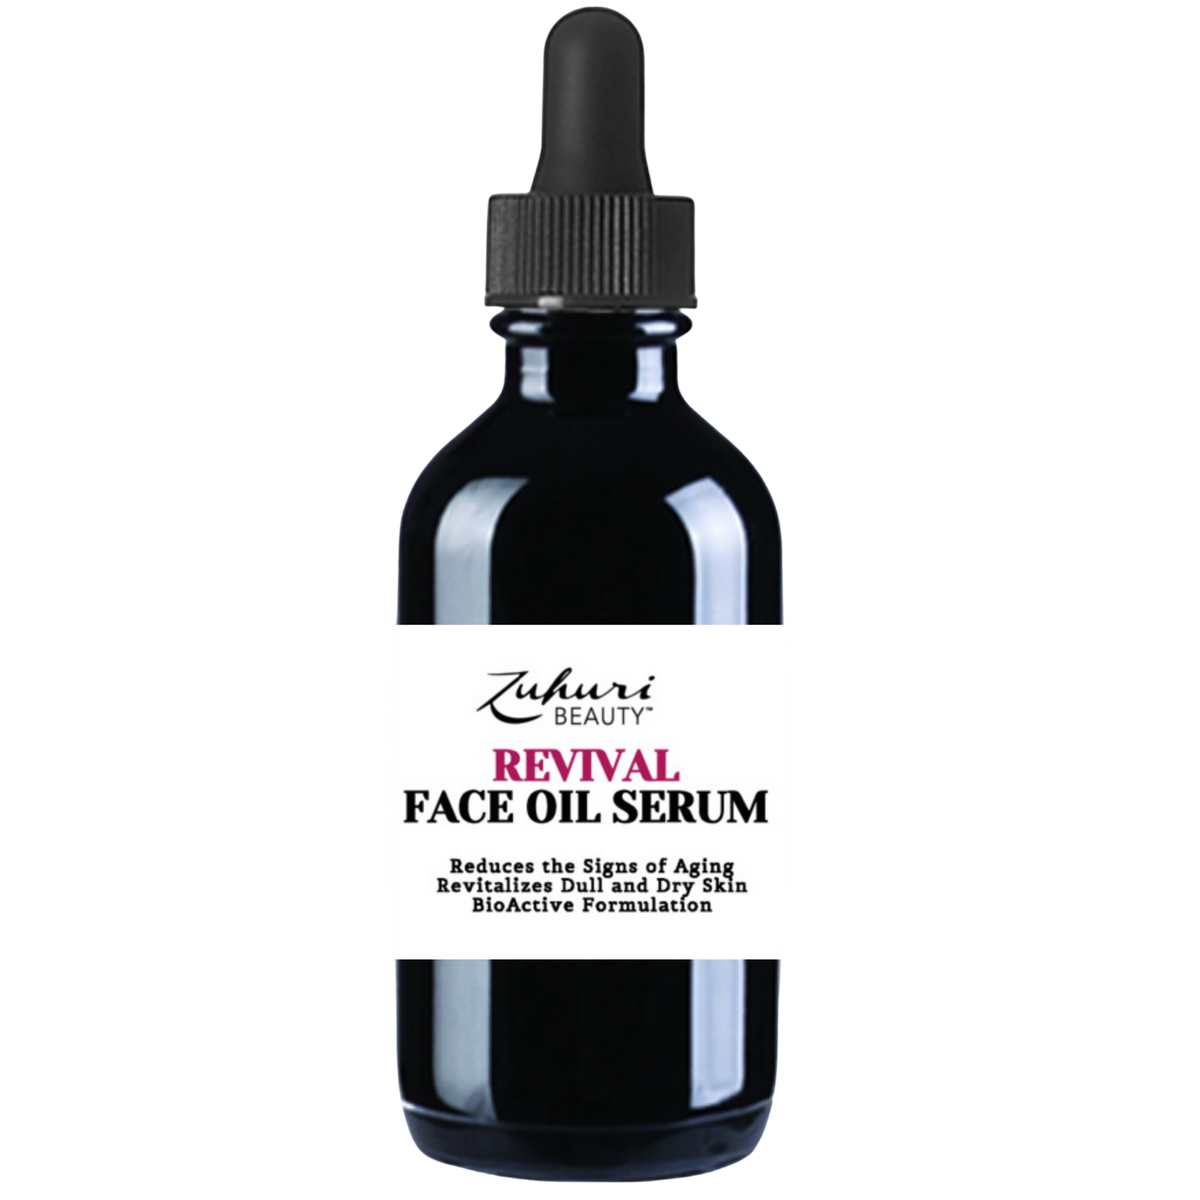 Zuhuri Beauty | REVIVAL Face Oil Serum for Early Signs of Aging | 1oz